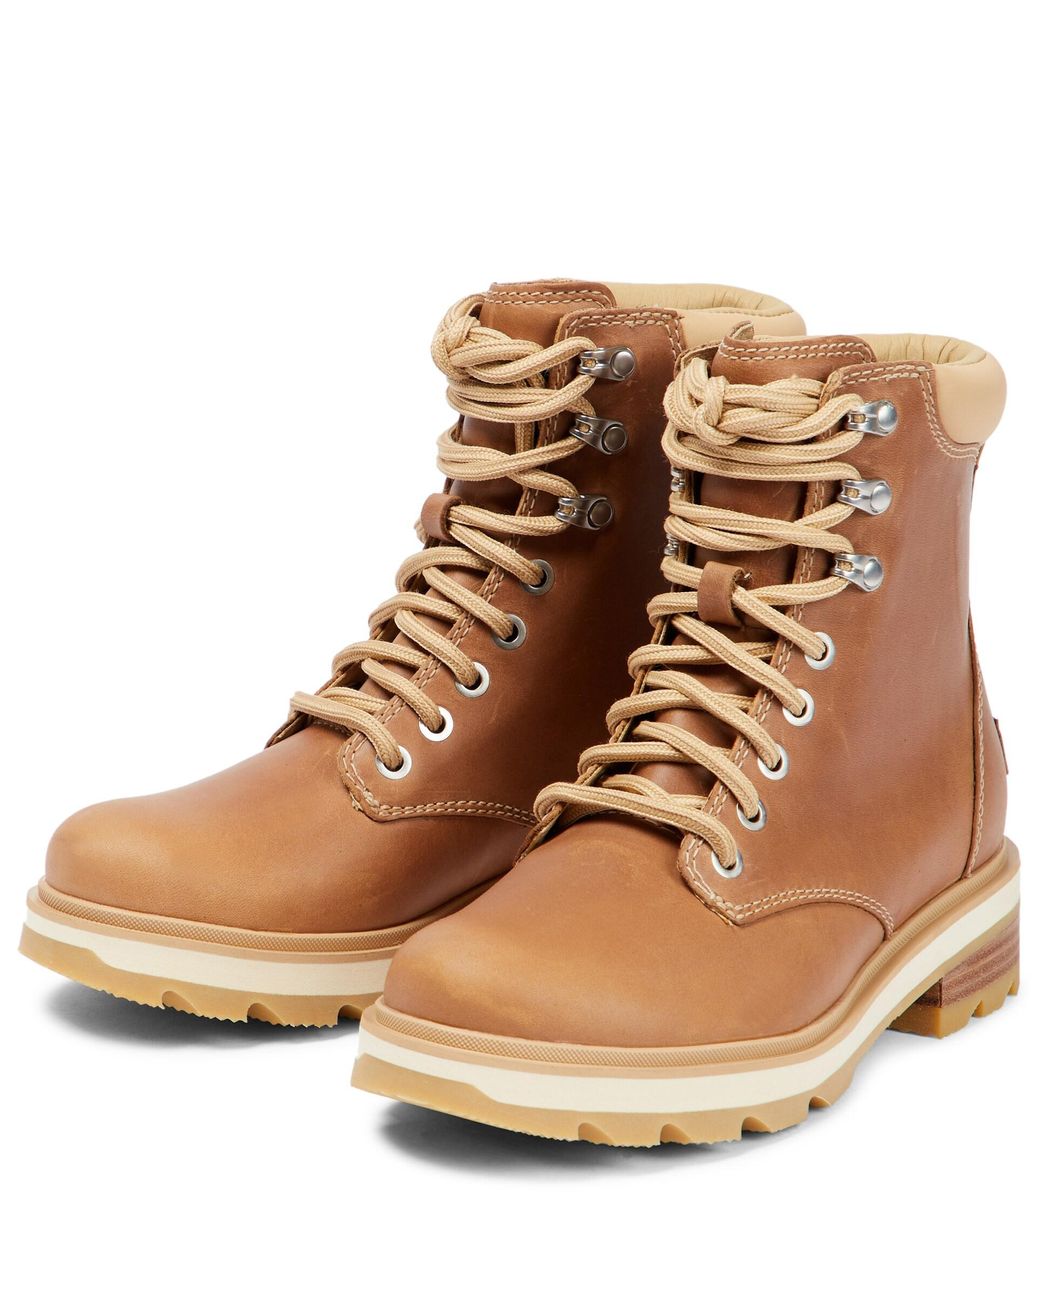 Sorel Torino Park Leather Ankle Boots in Natural | Lyst